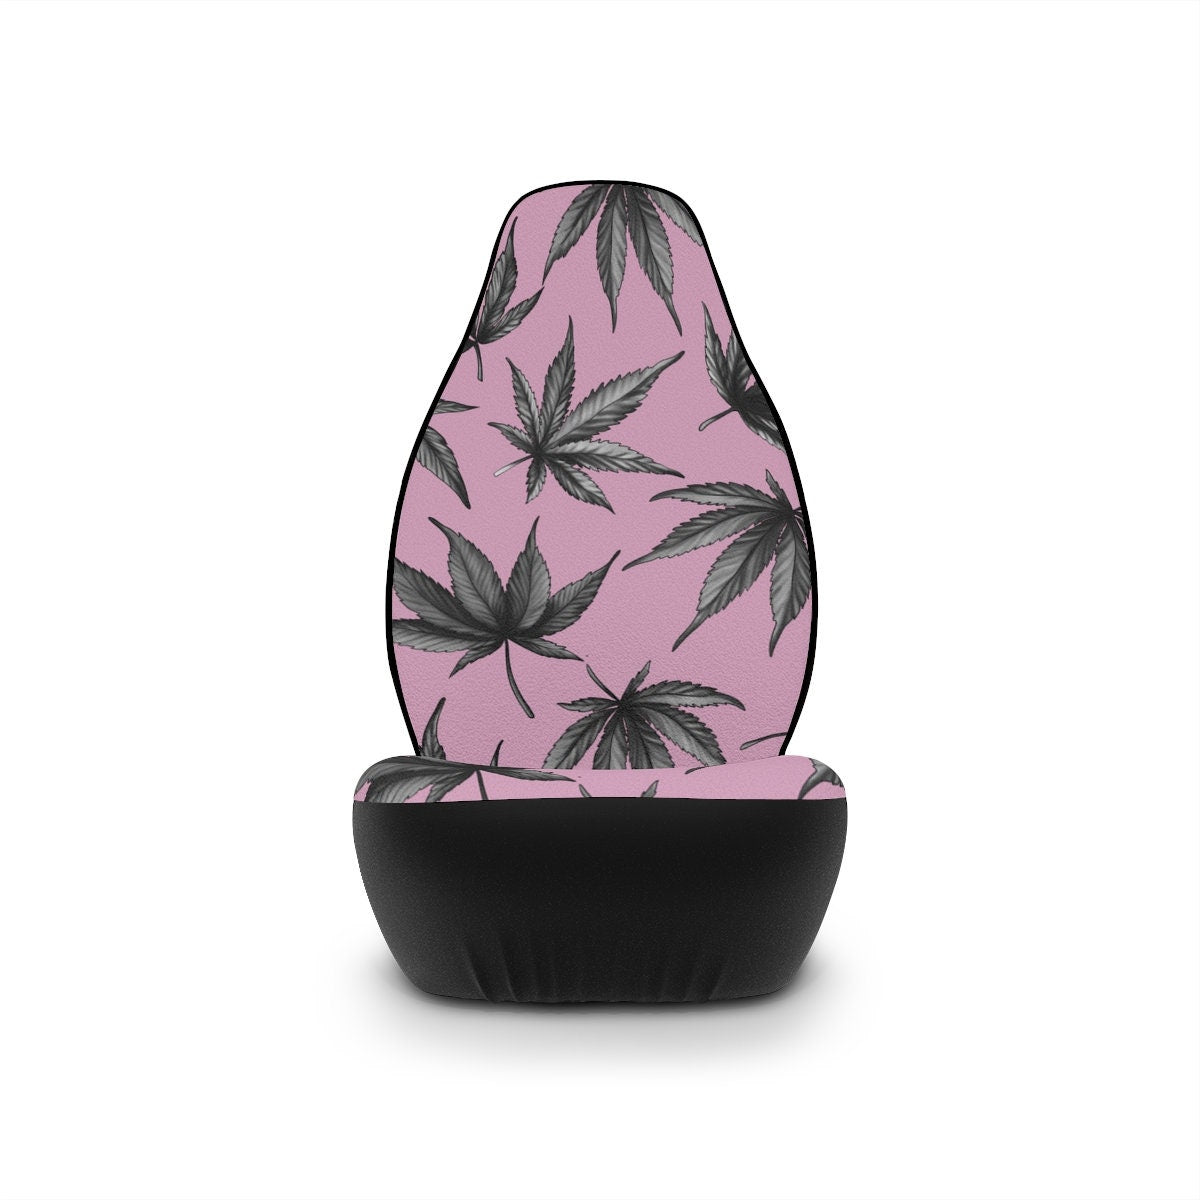 Car Seat Covers, Weed Leaf Car Accessories for Women, Pink Hippie Car Decor, Universal Chair Cover, Stoner Vehicle Seat Cover